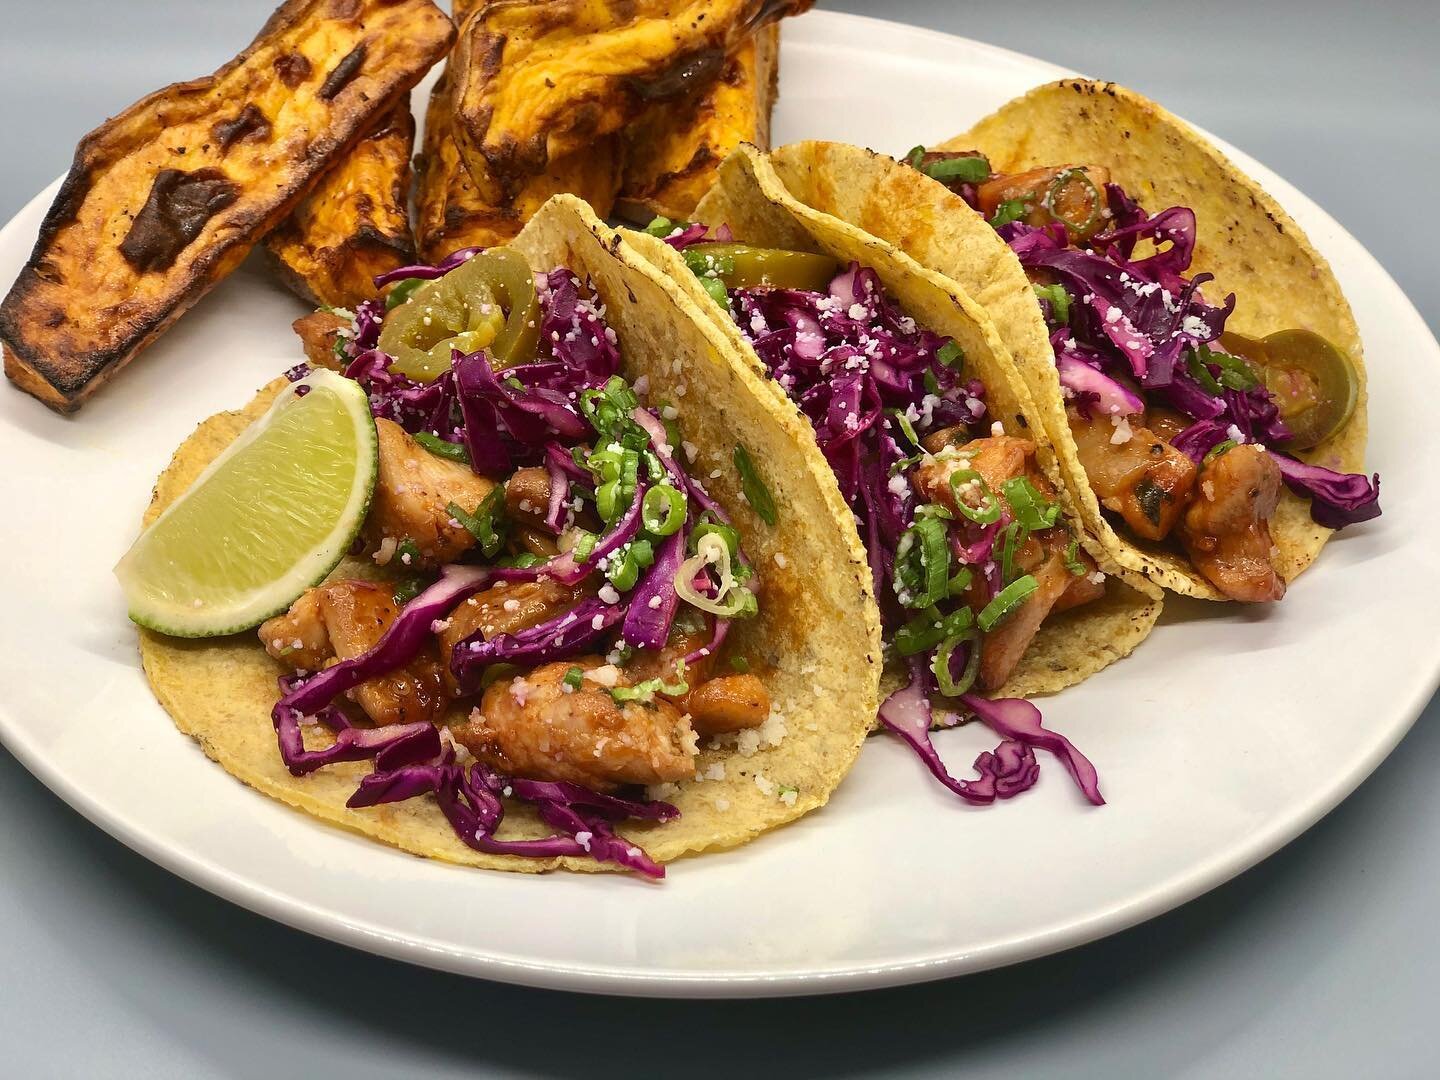 Taco Tuesday, Everyday! We have launched a meal delivery service for NYC &amp; NJ. Visit @fed_by_jpo to see our summer menu!